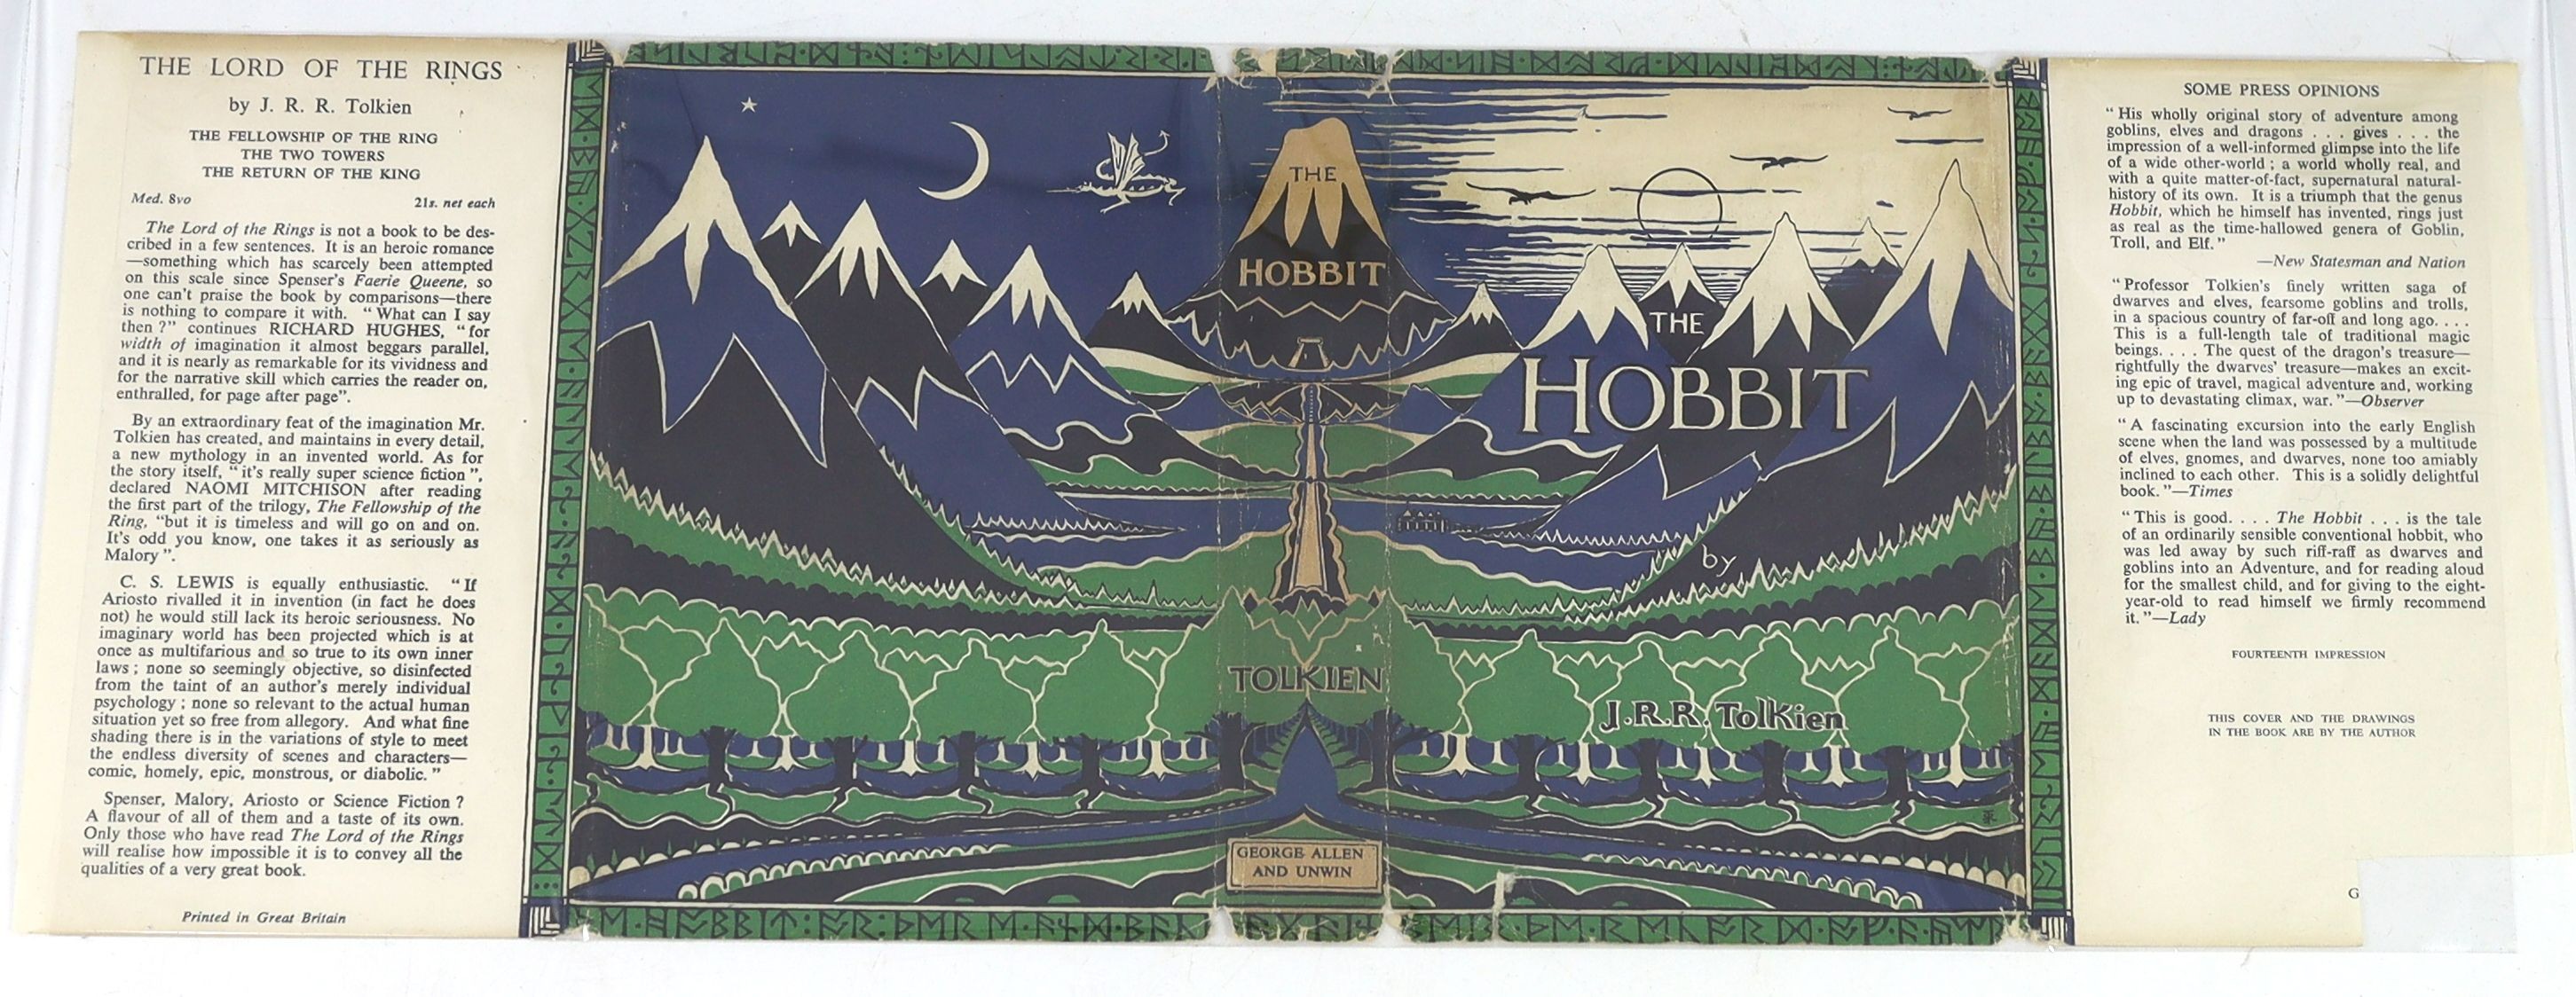 Tolkien, John Ronald Reuel - The Hobbit, 2nd edition, 14th impression, with colour frontispiece, map endpapers, original green cloth in clipped d/j, spine with minor tears and loss, ownership inscription in red ink to fr